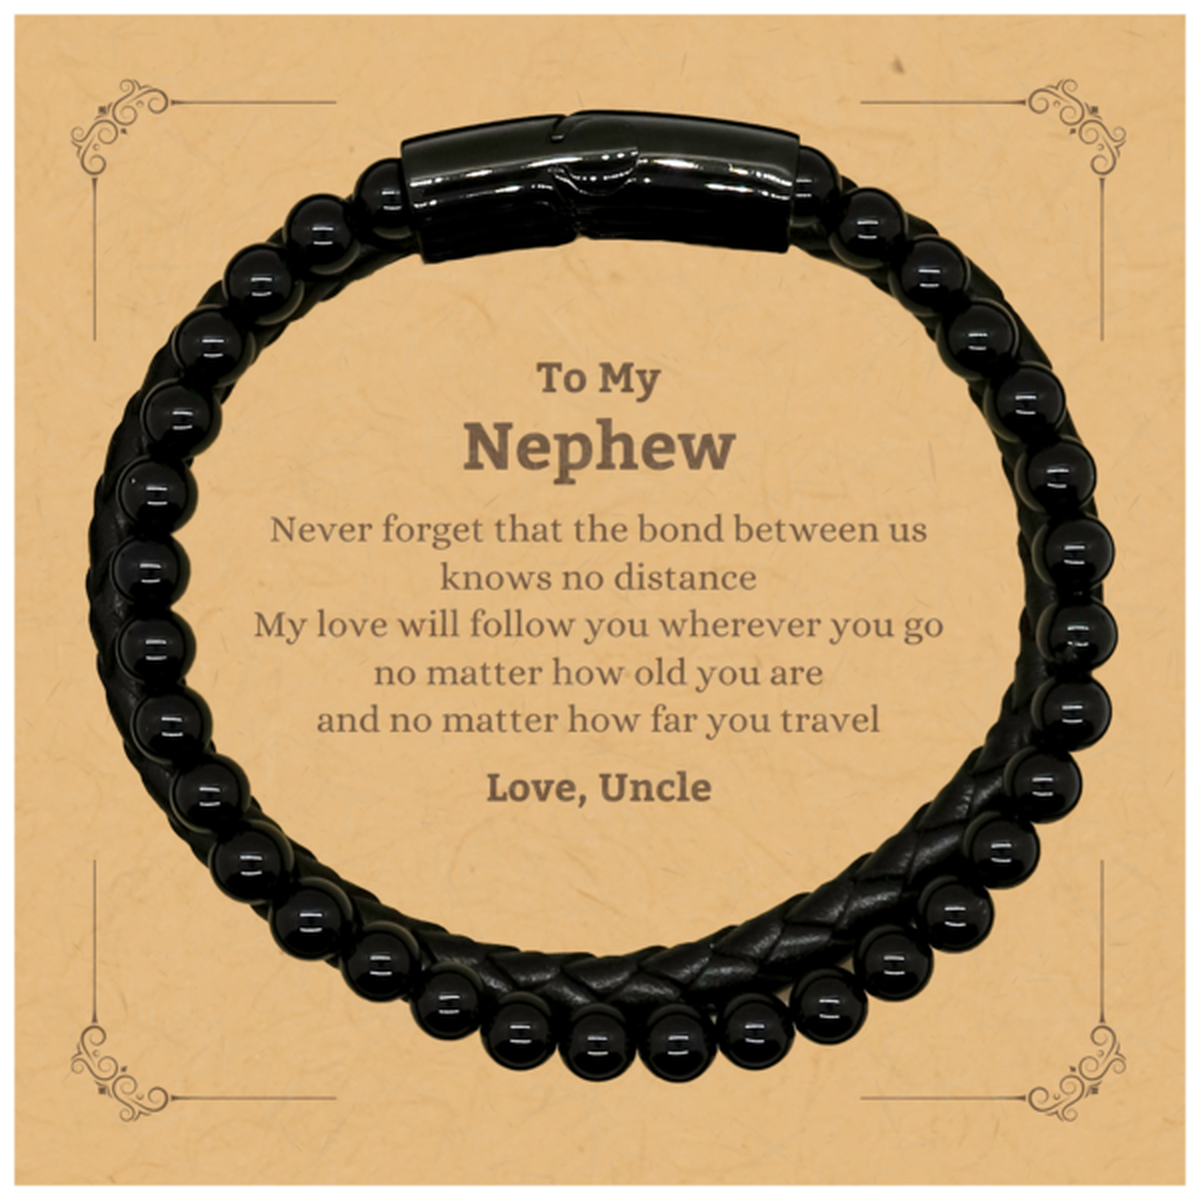 Nephew Birthday Gifts from Uncle, Adjustable Stone Leather Bracelets for Nephew Christmas Graduation Unique Gifts Nephew Never forget that the bond between us knows no distance. Love, Uncle